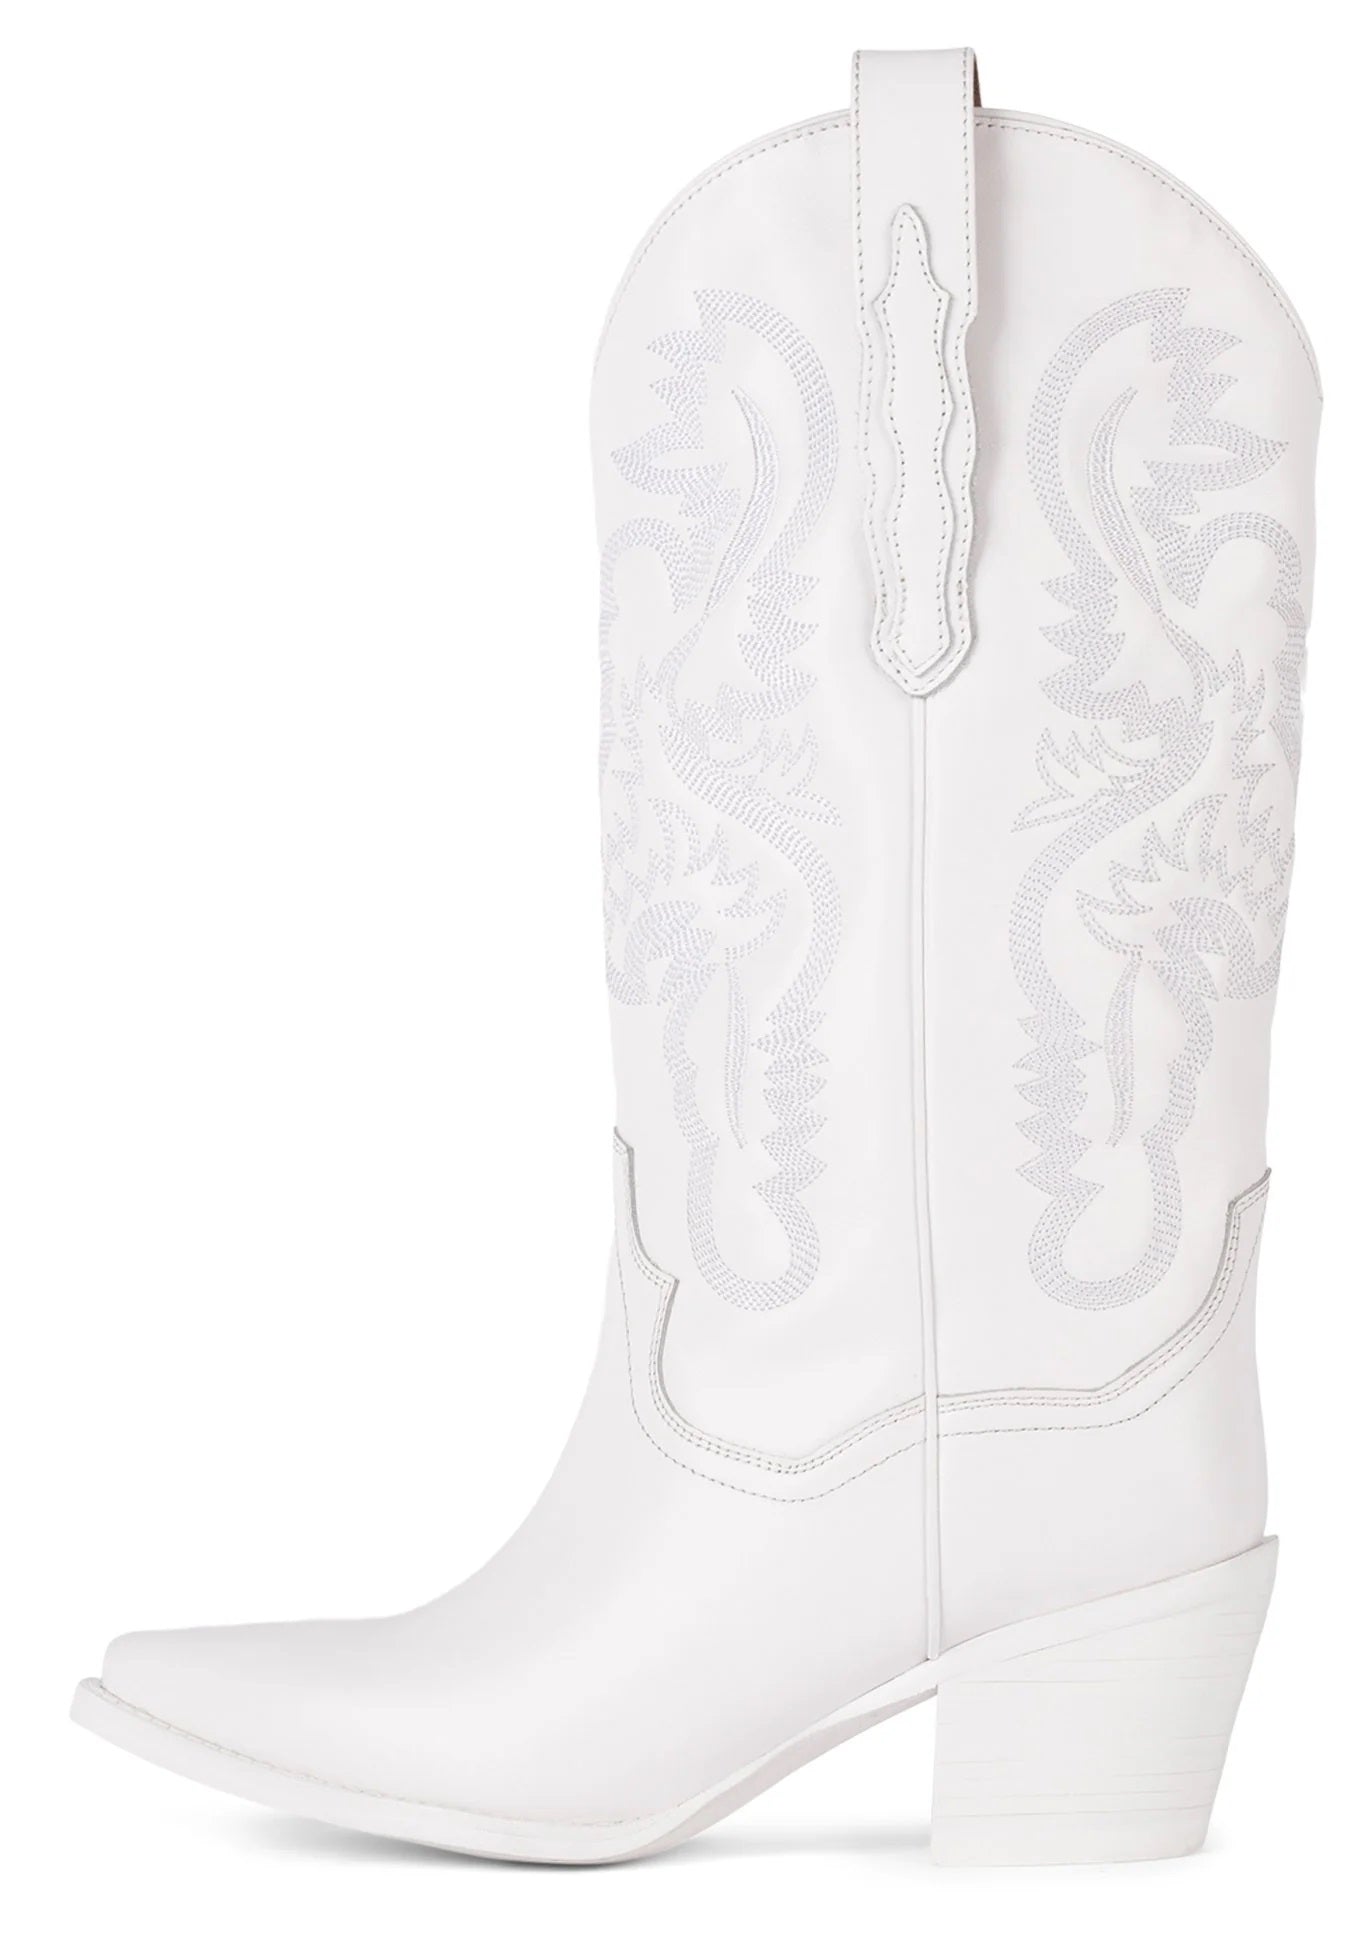 The It Girl Cowgirl boots